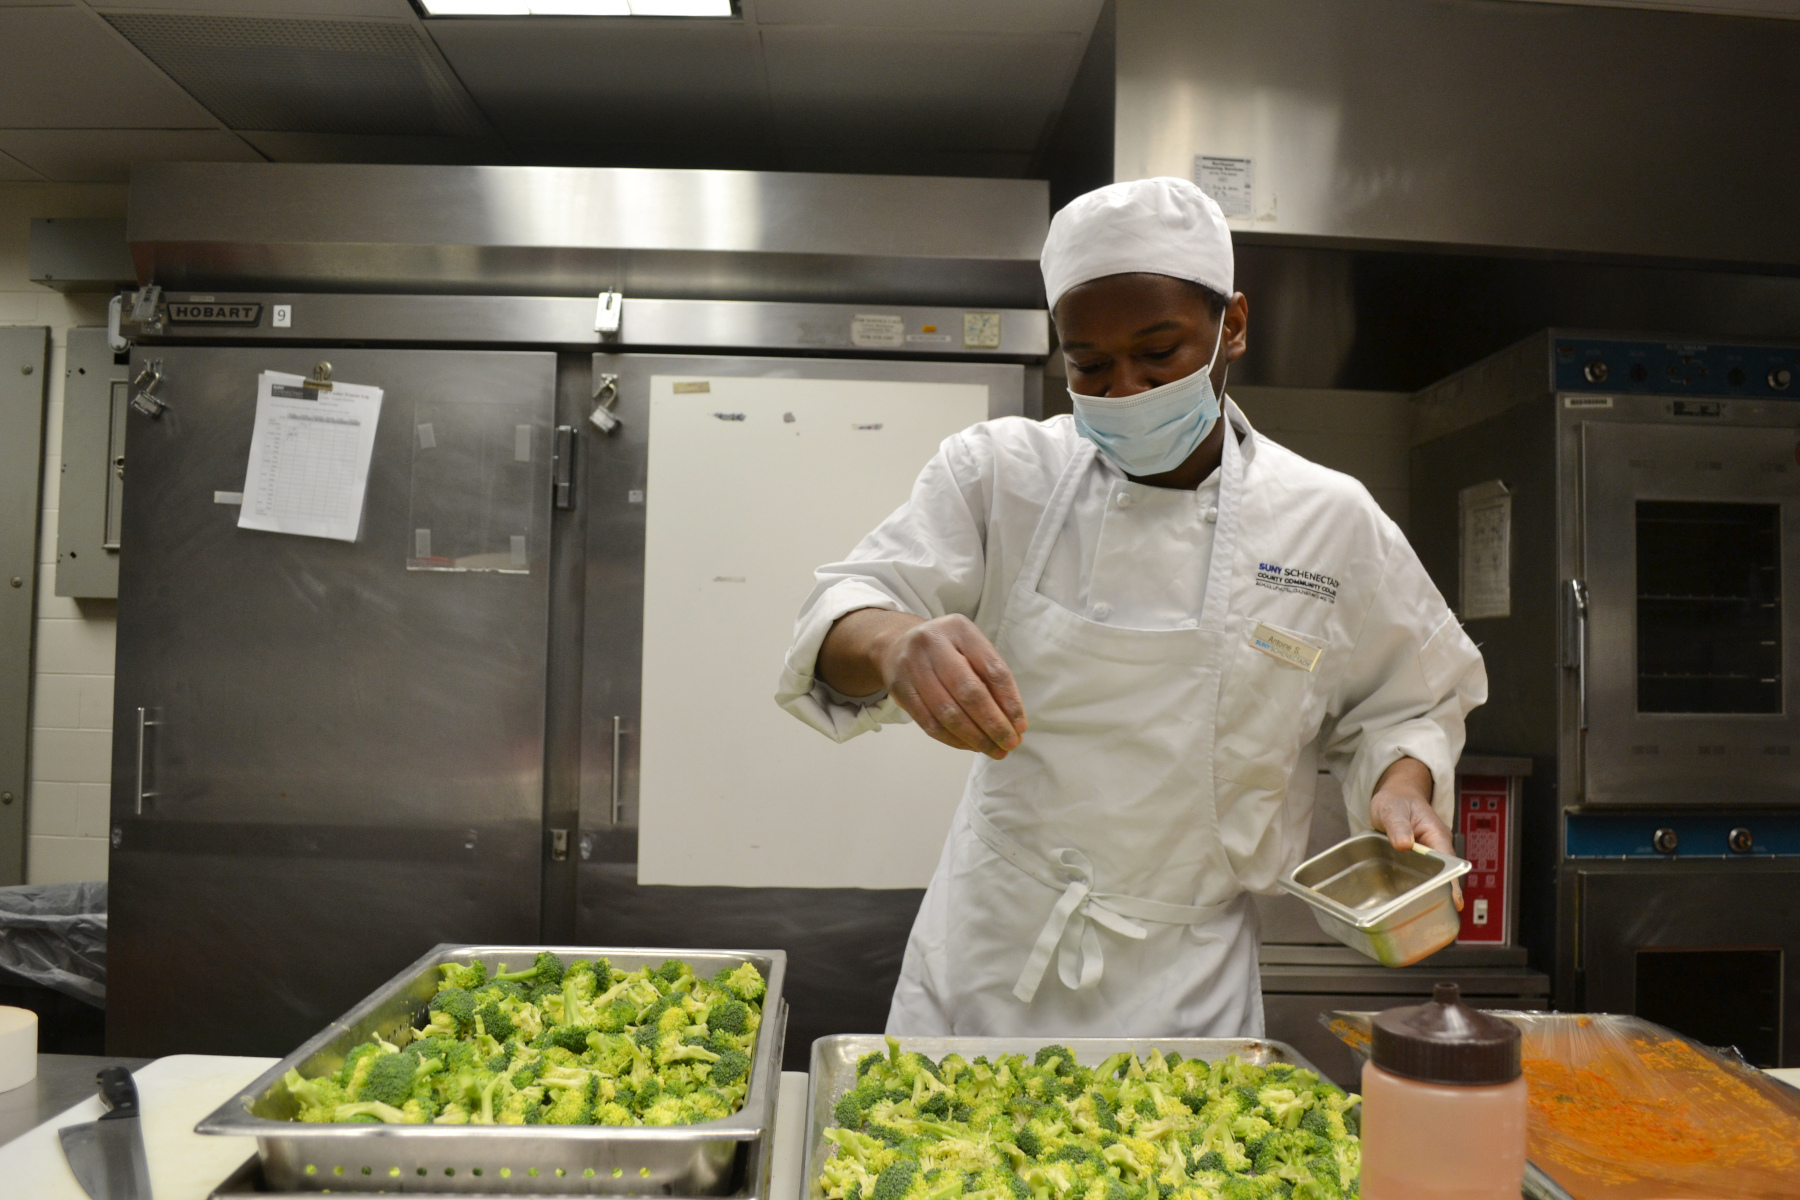 Student Chef pouring salt on broccoli, in Culinary lab